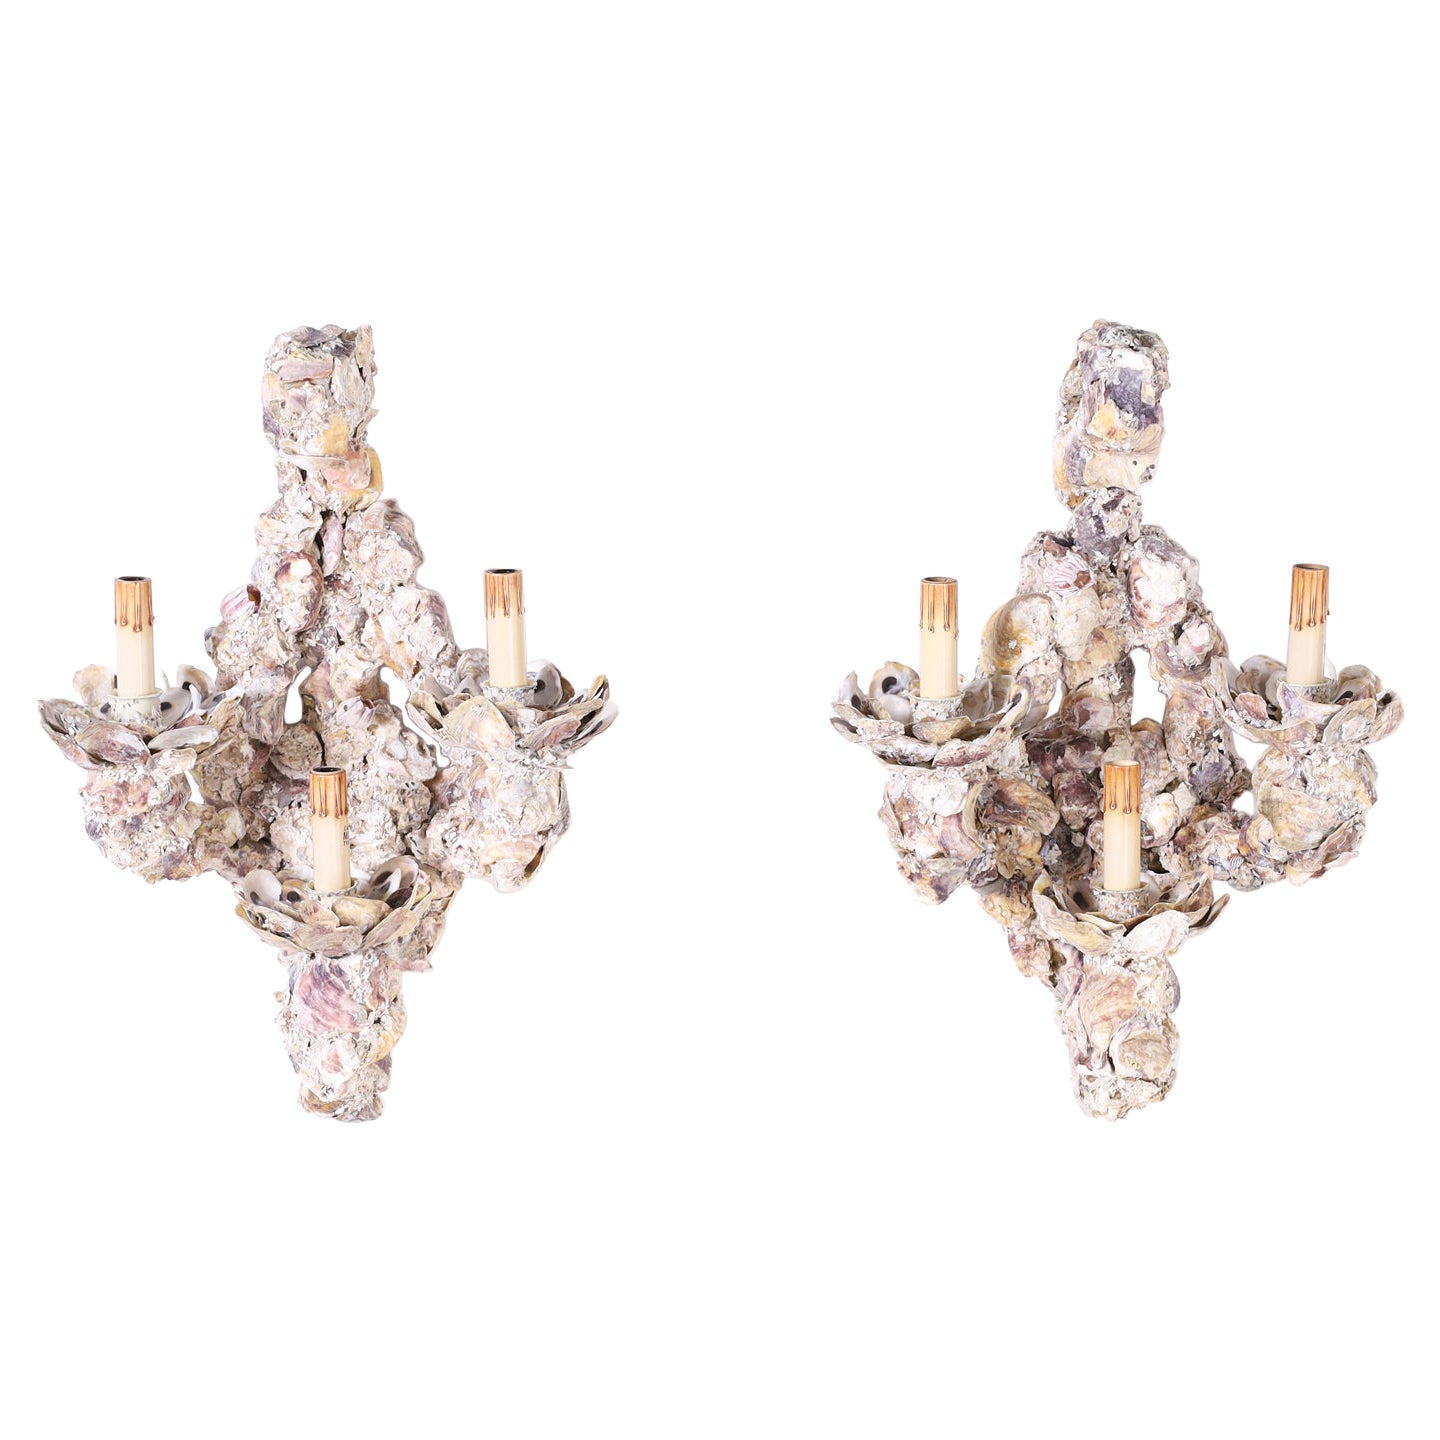 Pair of Oyster Shell Grotto Style Wall Sconces